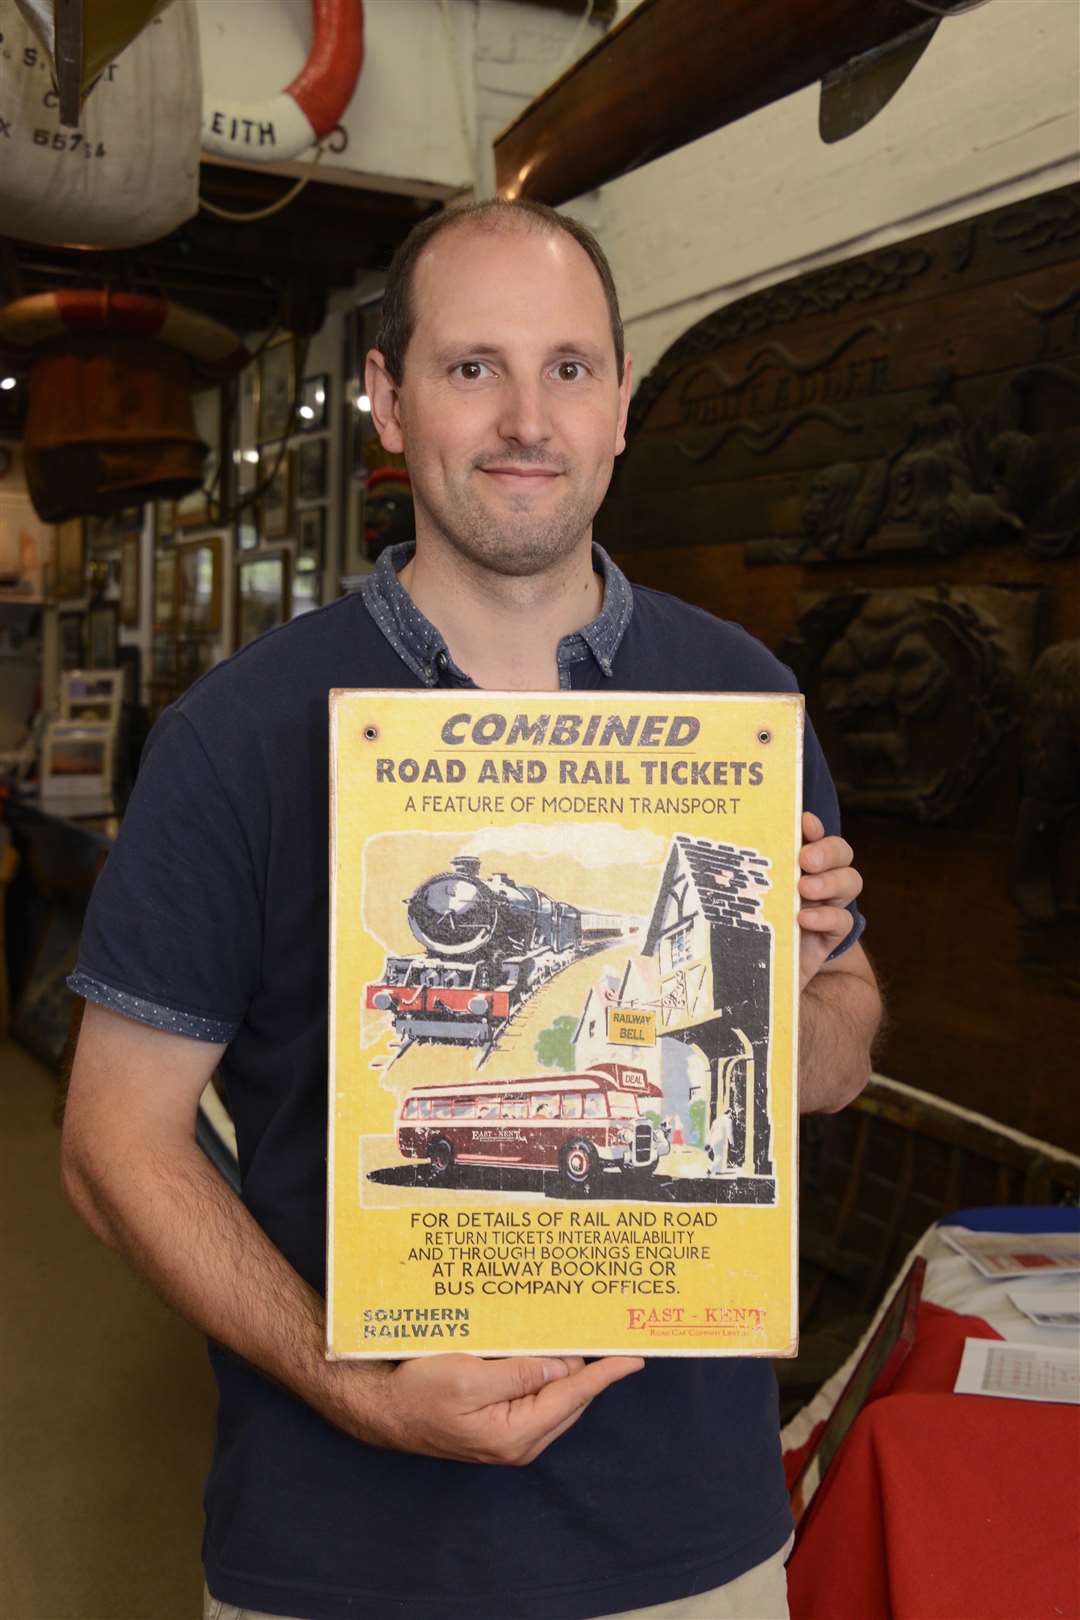 Deal Maritime and Heritage Museum East Kent Road Car Company exhibition organiser Colin Varrall